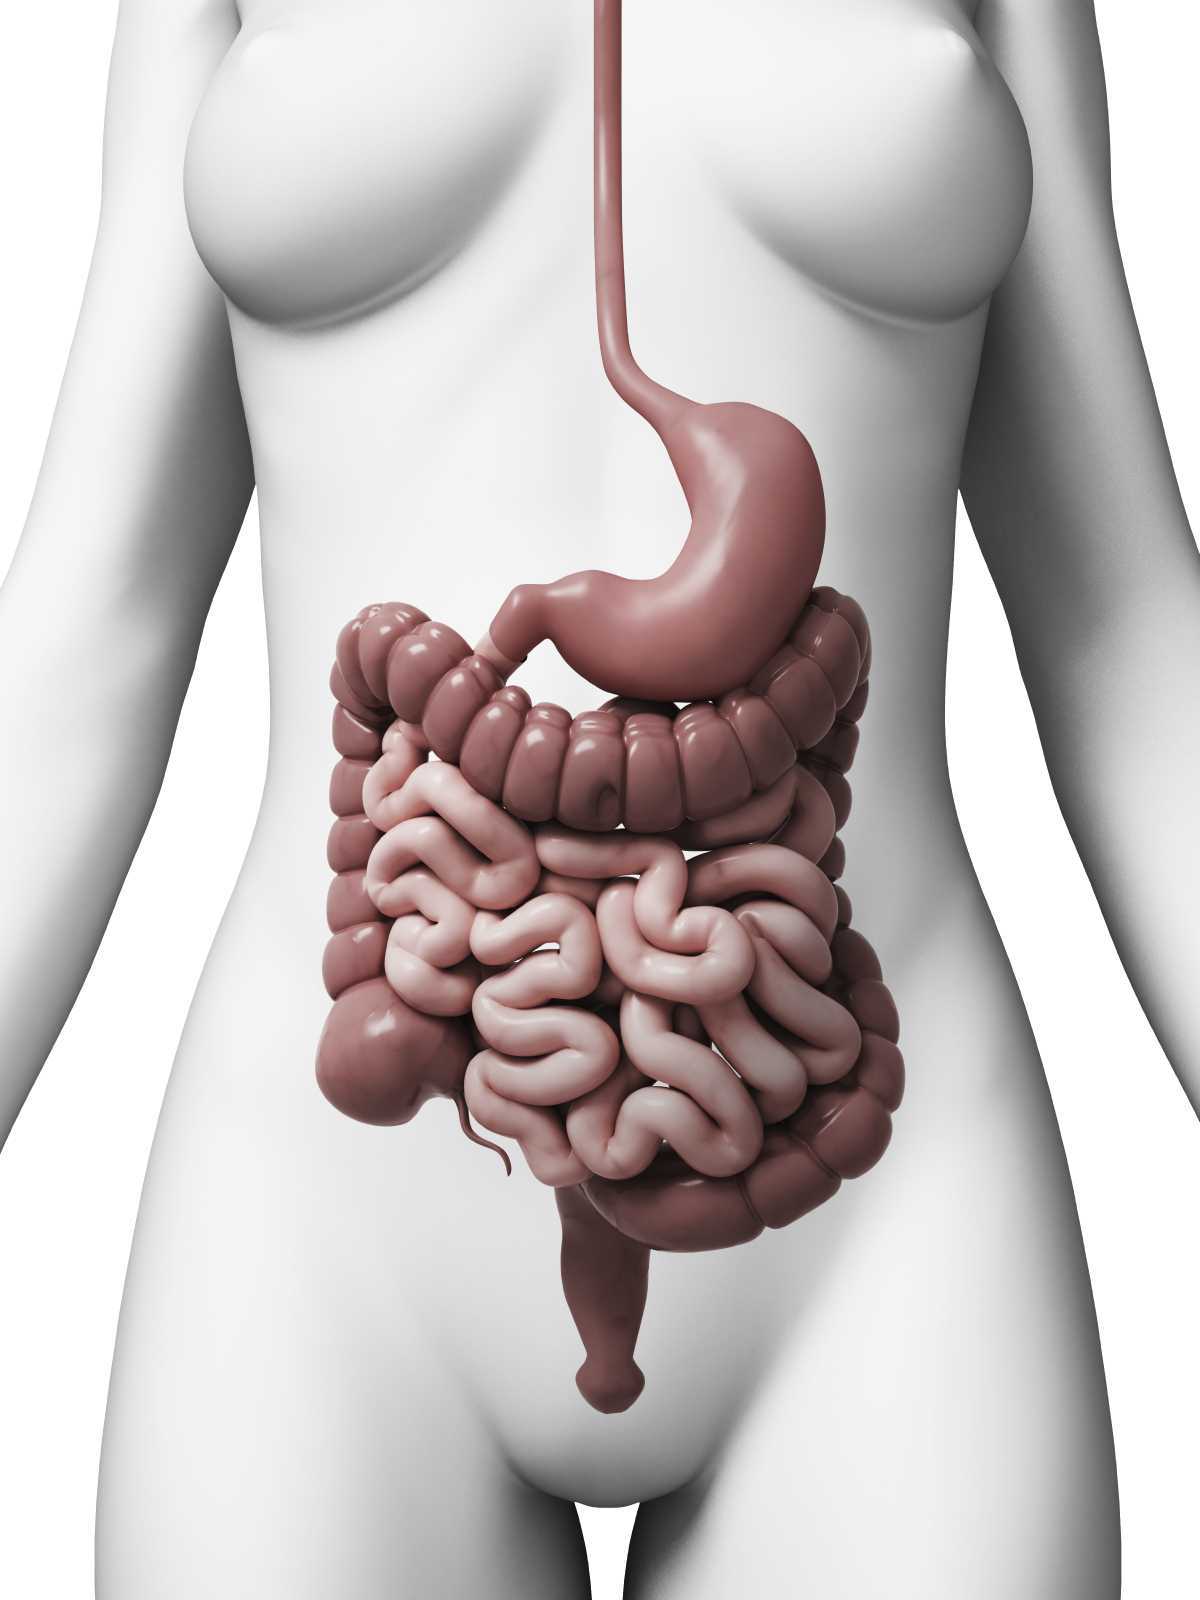 Dyssynergic Defecation: A Common Culprit of Chronic Constipation and Abdominal Pain